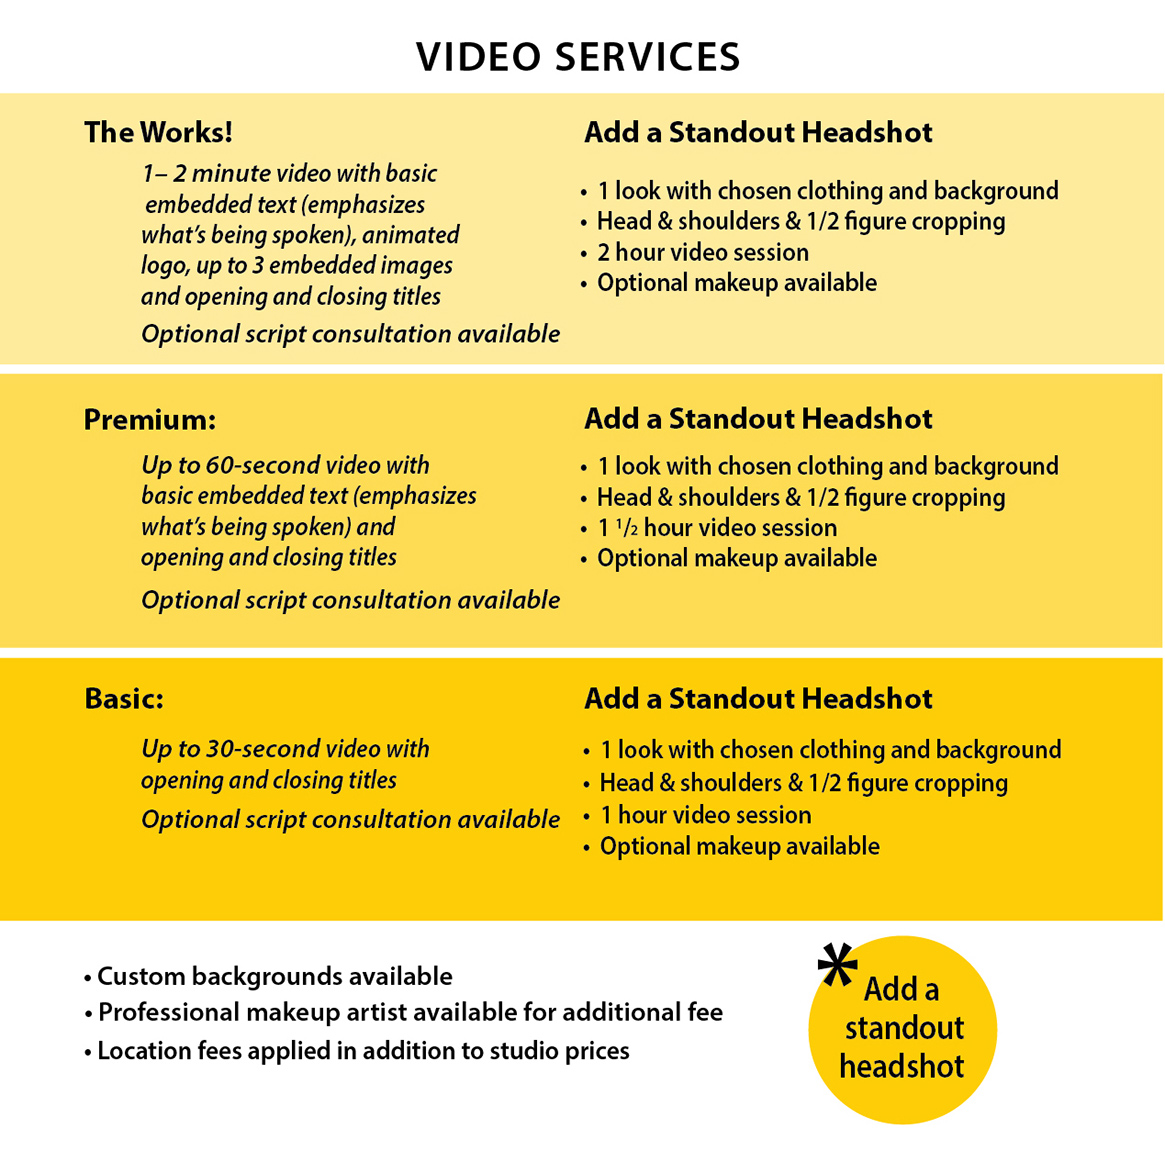 revised_hsg_video_services